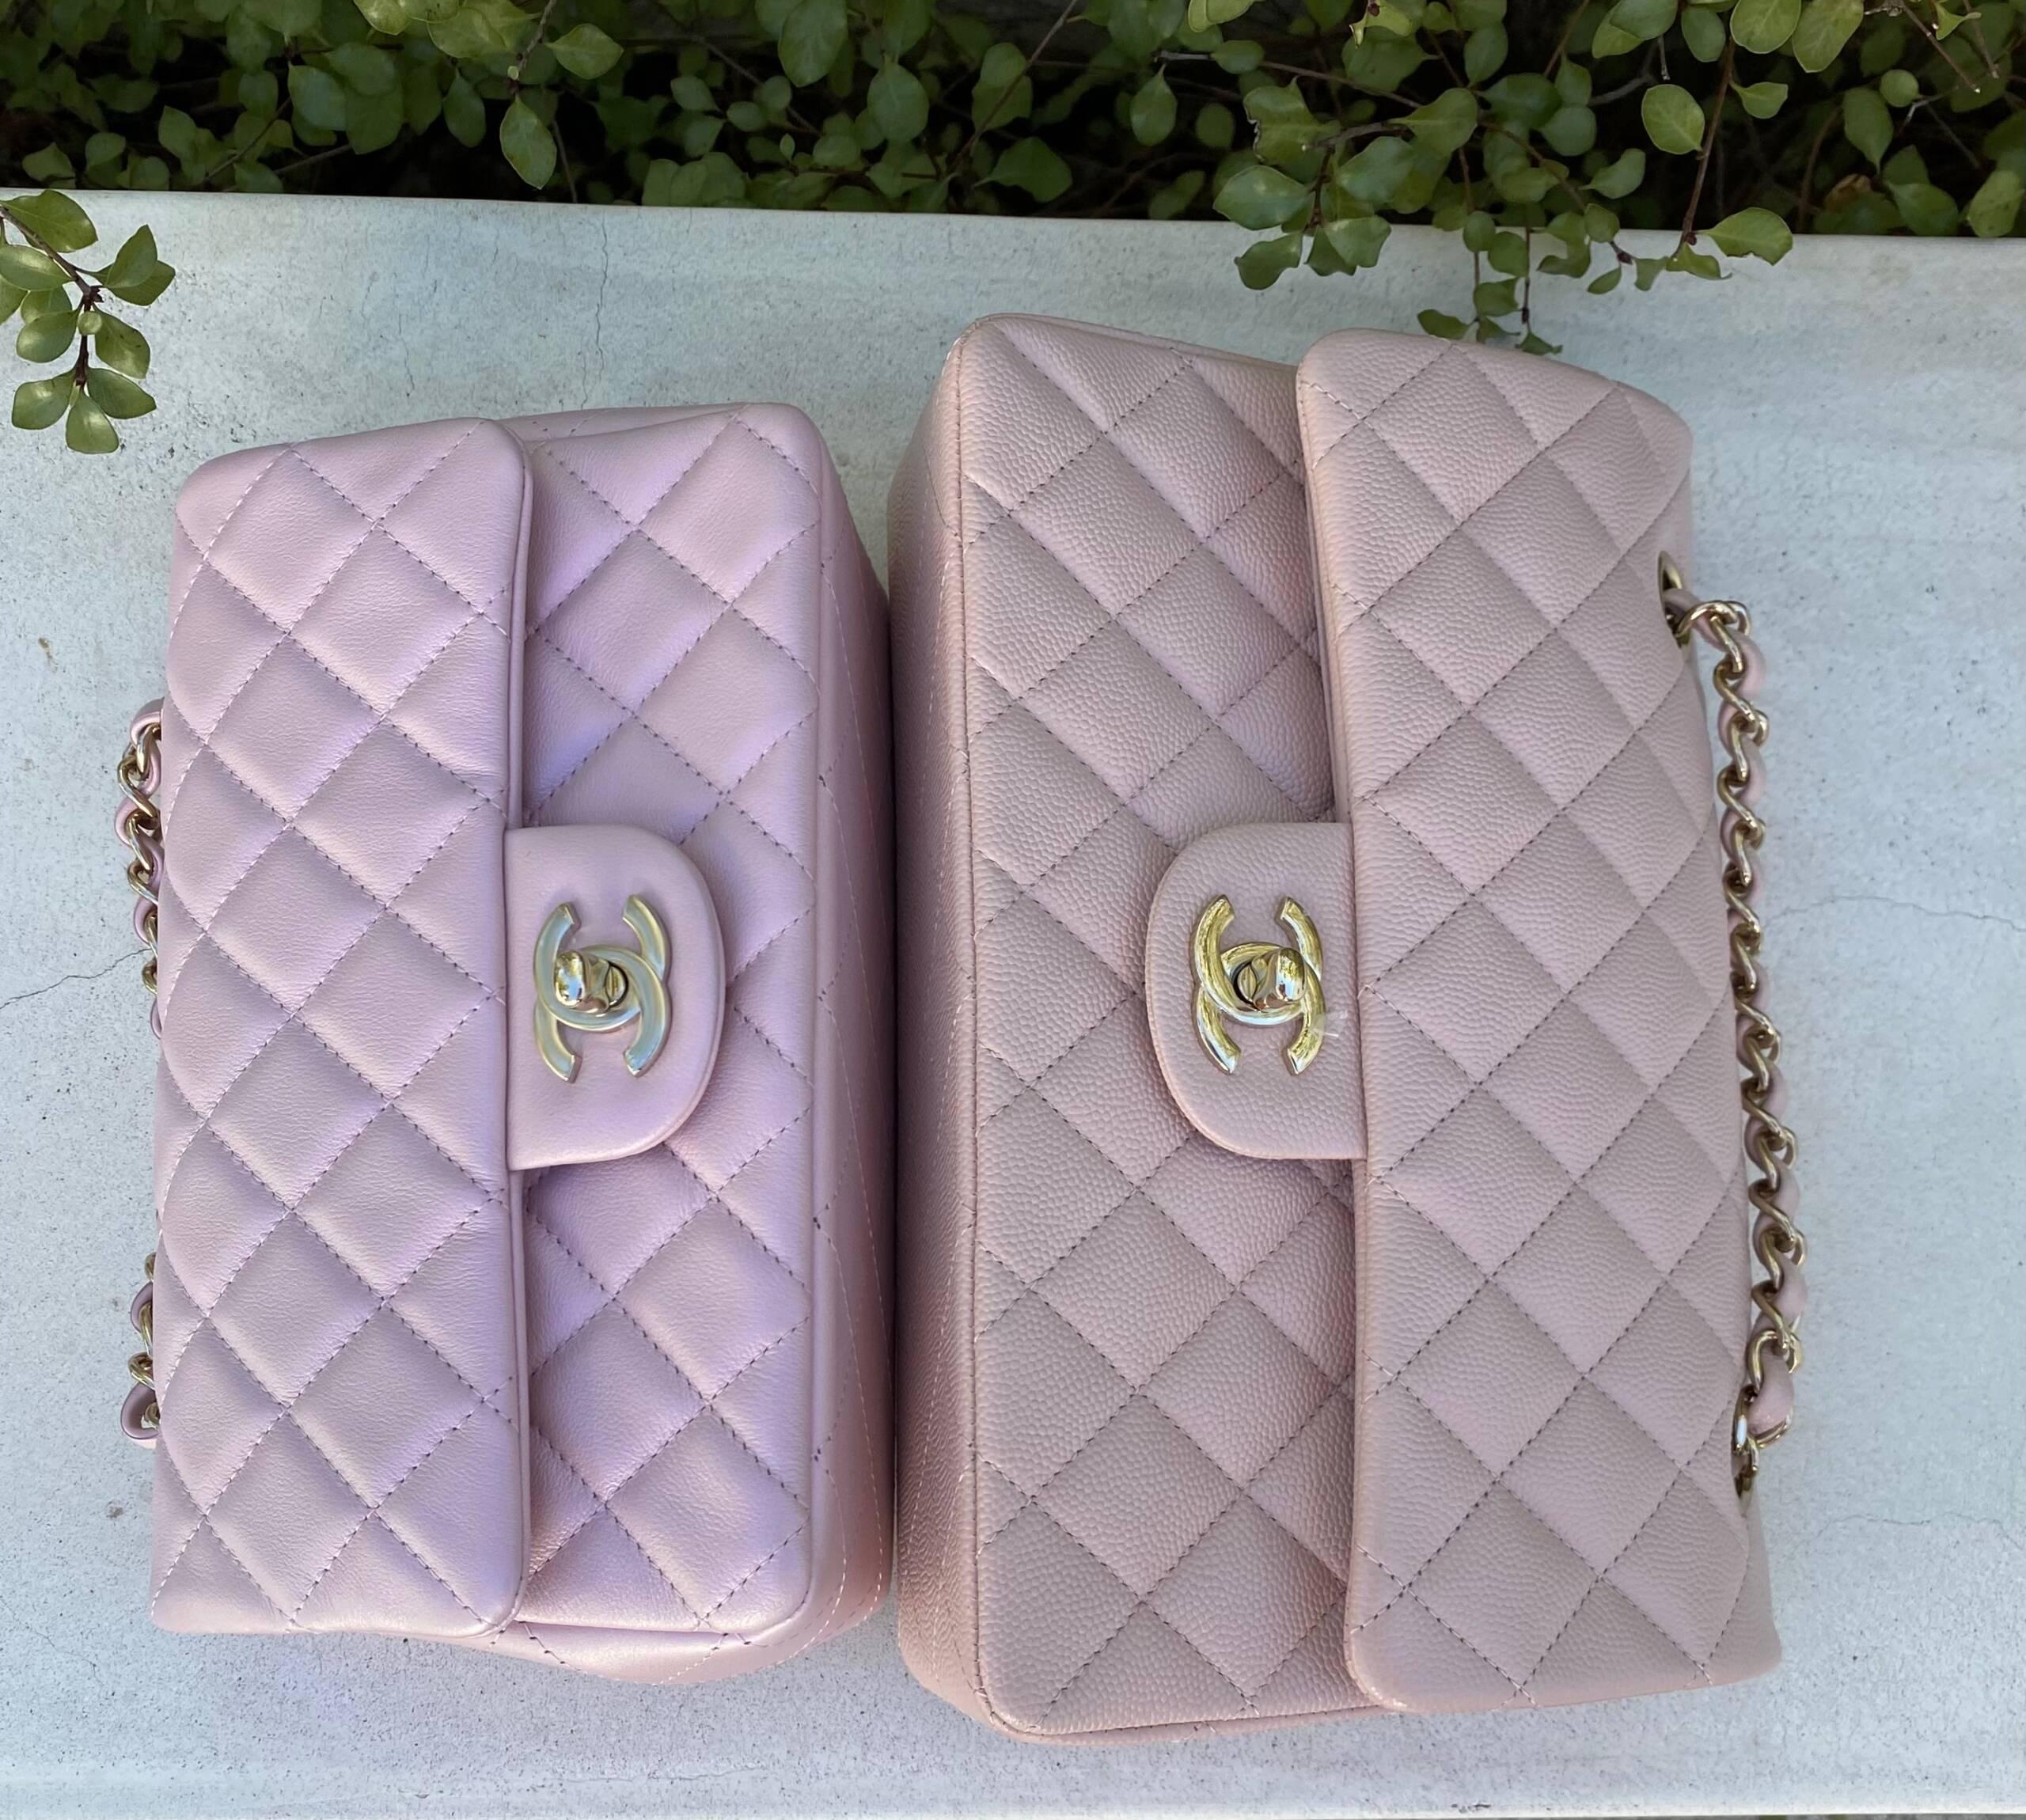 chanel quilted handbag